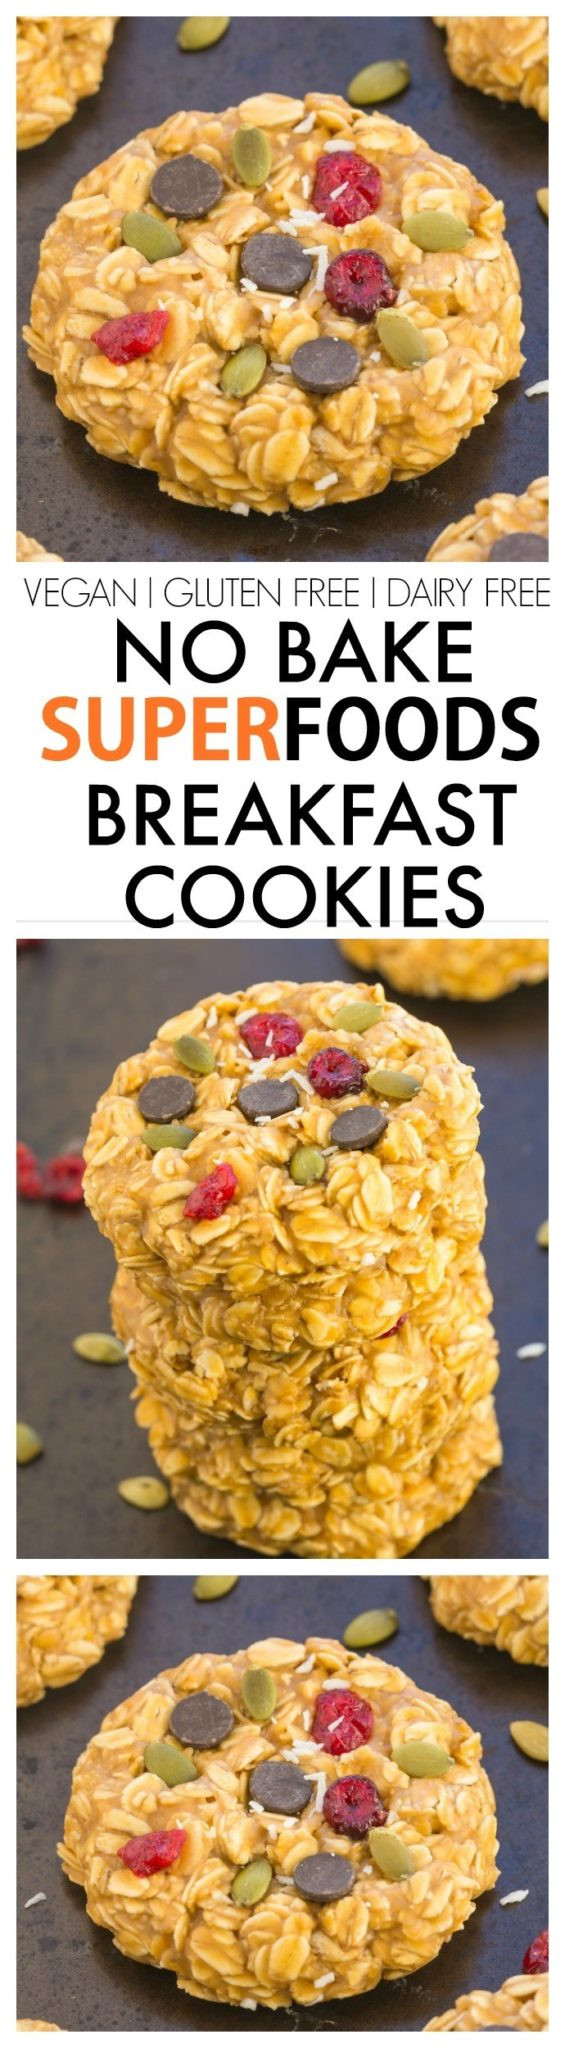 Gluten Free Dairy Free No Bake Cookies
 Healthy Snacks and Treats Recipes The BEST and Yummiest